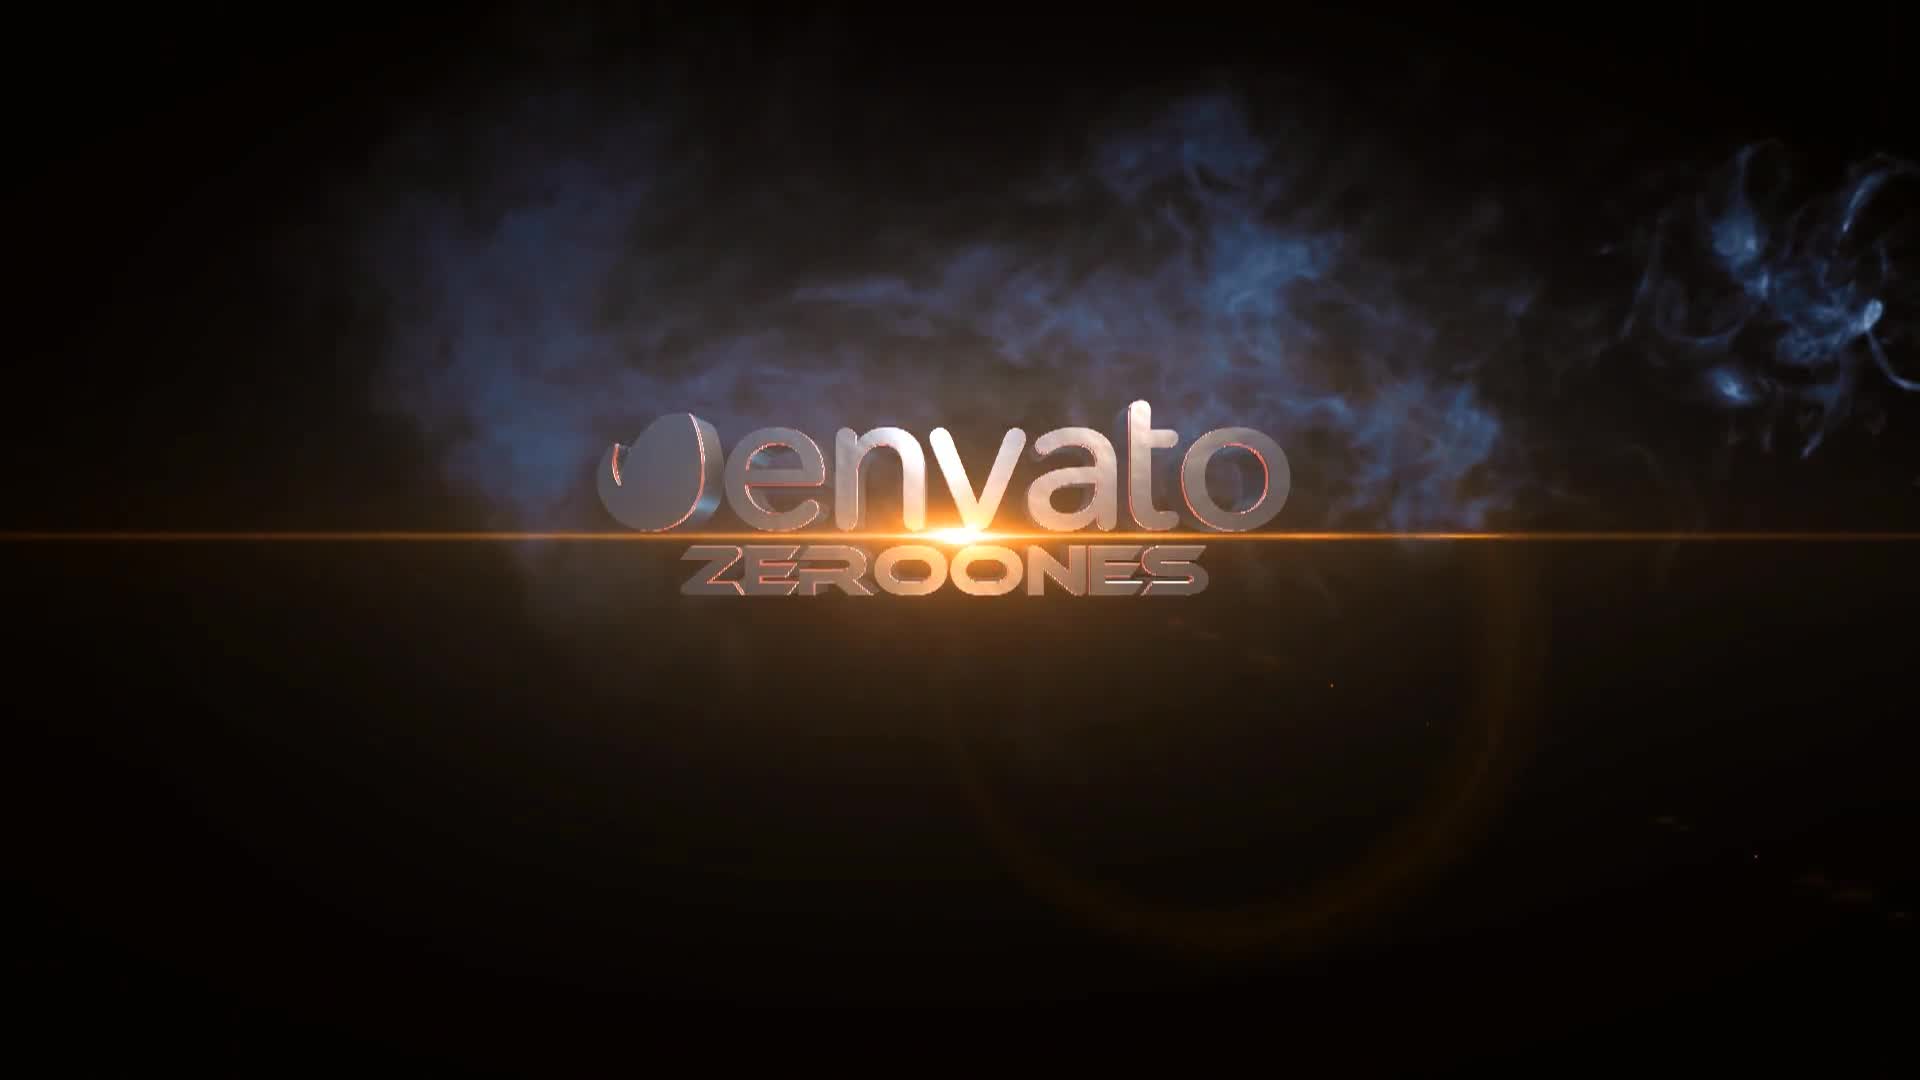 Exploding image reveal - Download Videohive 15822592